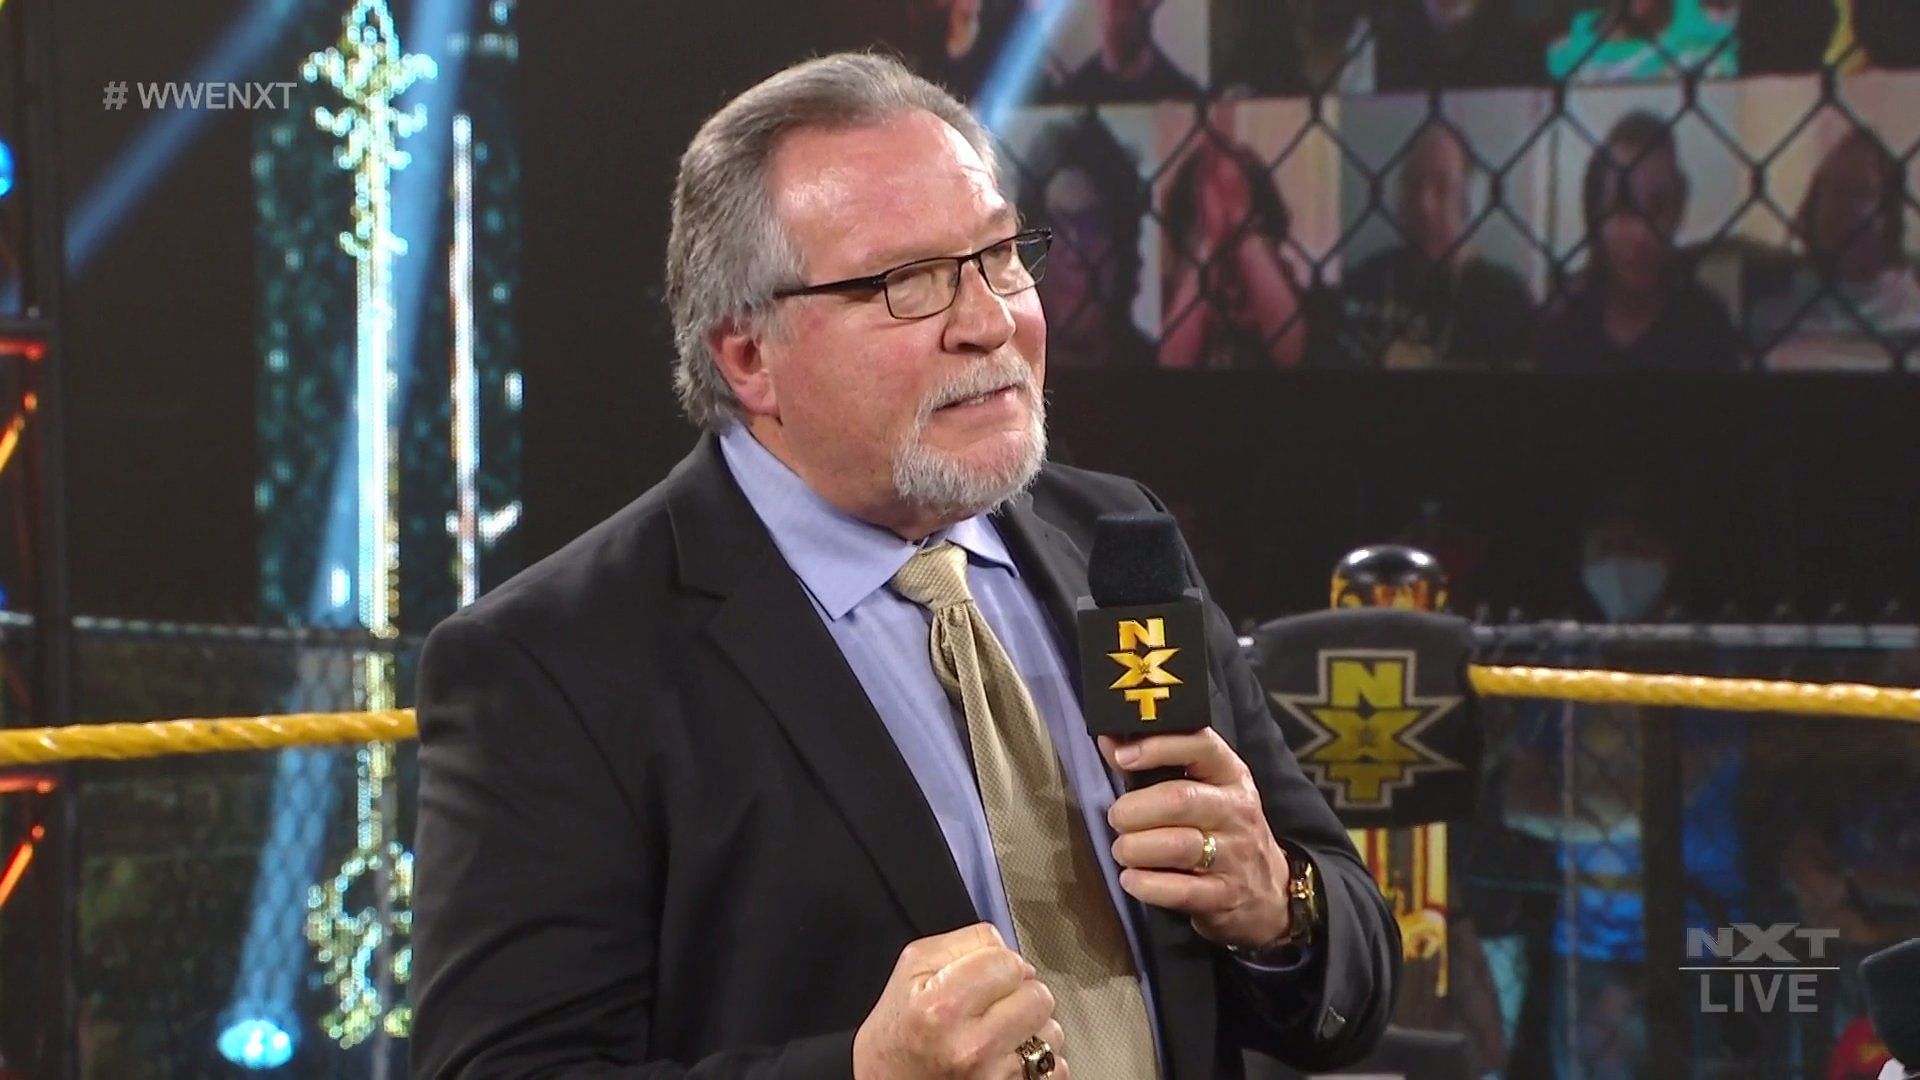 Ted DiBiase was part of an entertaining storyline on NXT